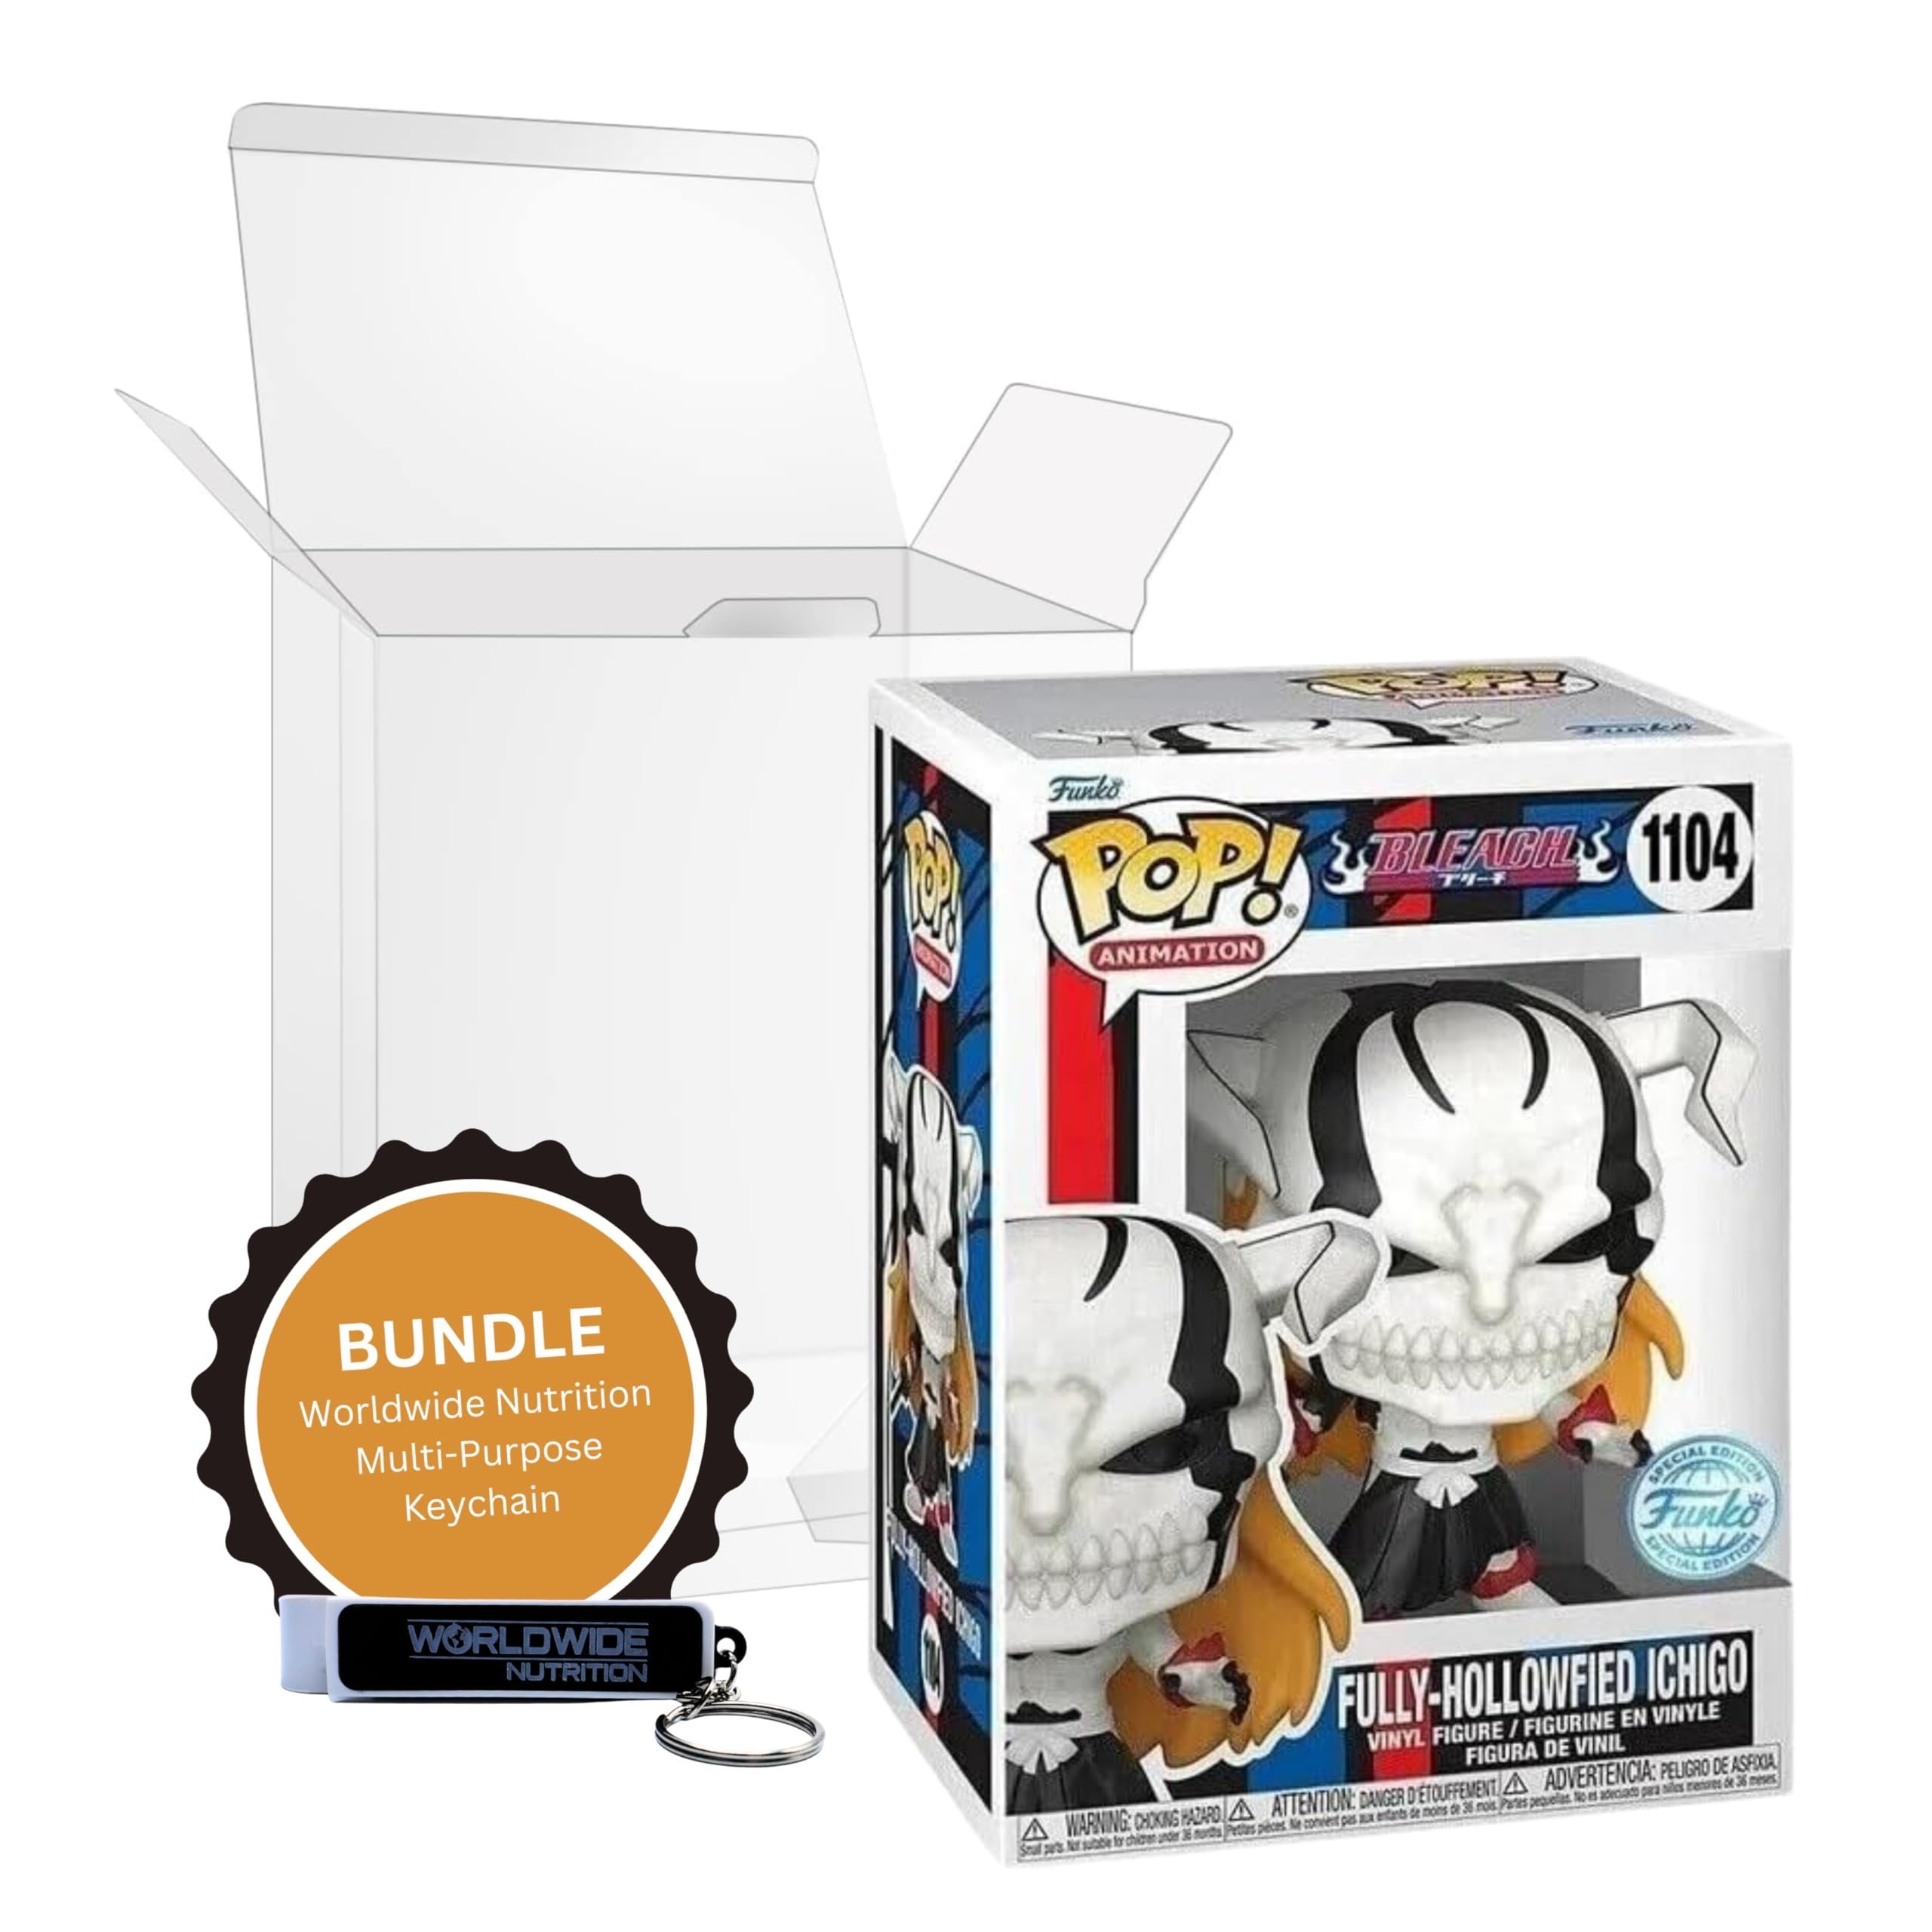 Worldwide Nutrition Bundle: Funko Bleach - Fully-Hollowfied Ichigo Lorde Vasto Form Vinyl Figure Multicolored, 3.75 inches with Compatible Box Protector Case and Multi-Purpose Key Chain